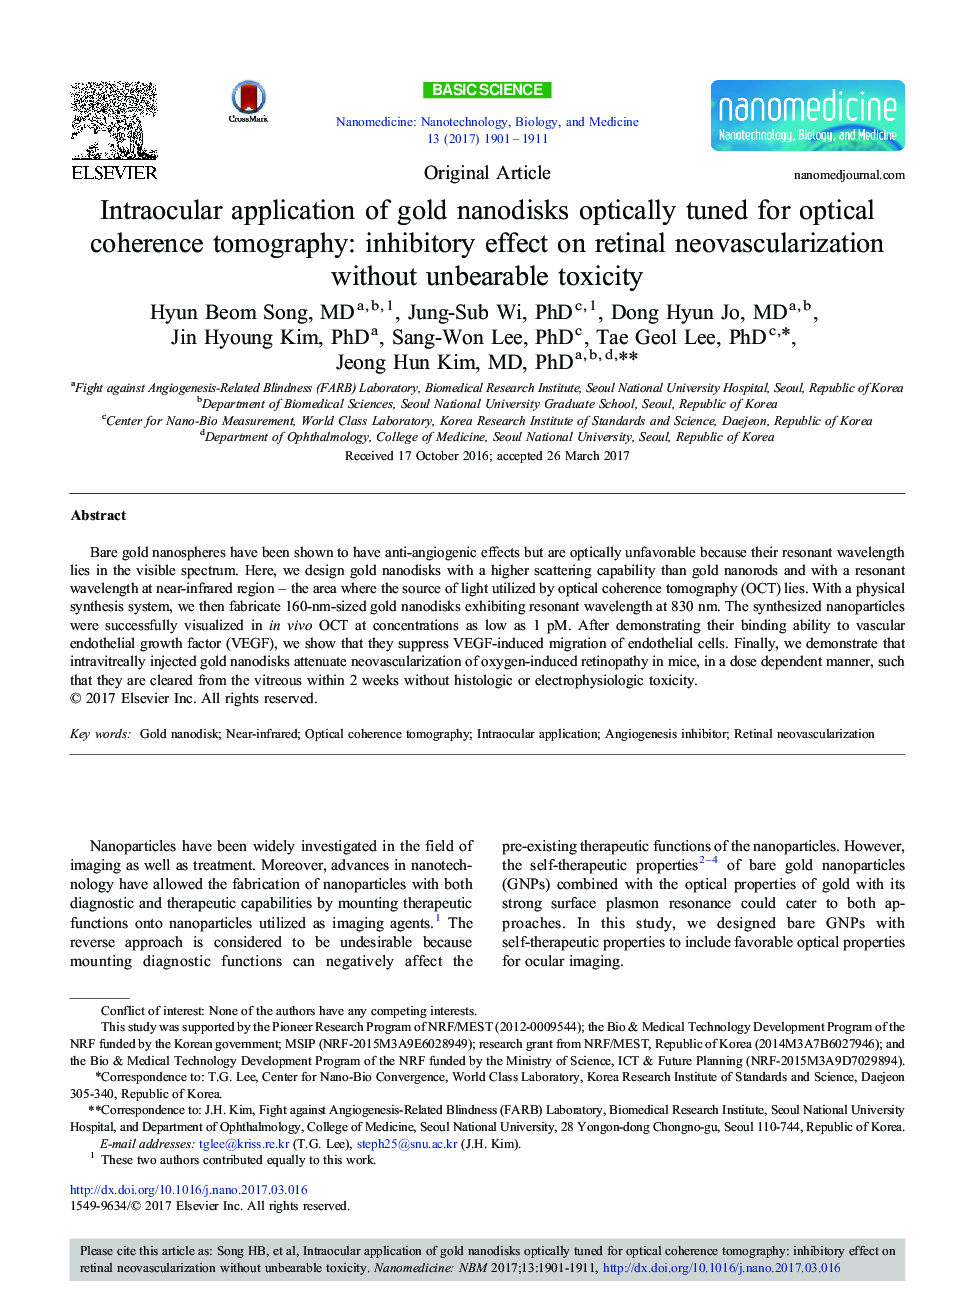 Intraocular application of gold nanodisks optically tuned for optical coherence tomography: inhibitory effect on retinal neovascularization without unbearable toxicity